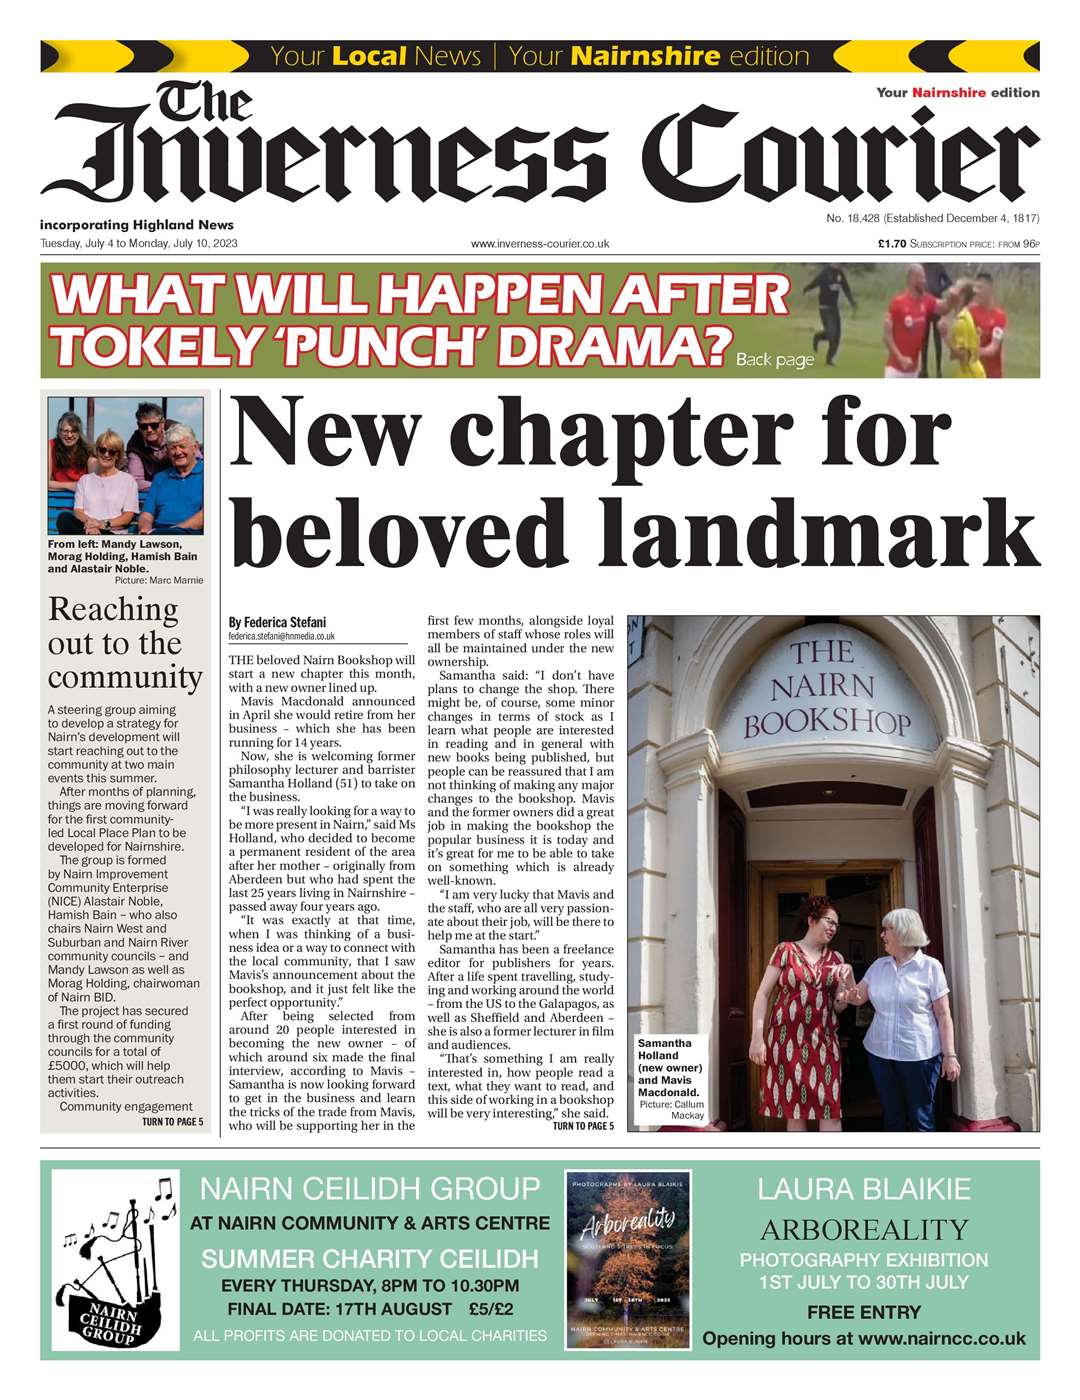 The Inverness Courier (Nairnshire edition), July 4, front page.